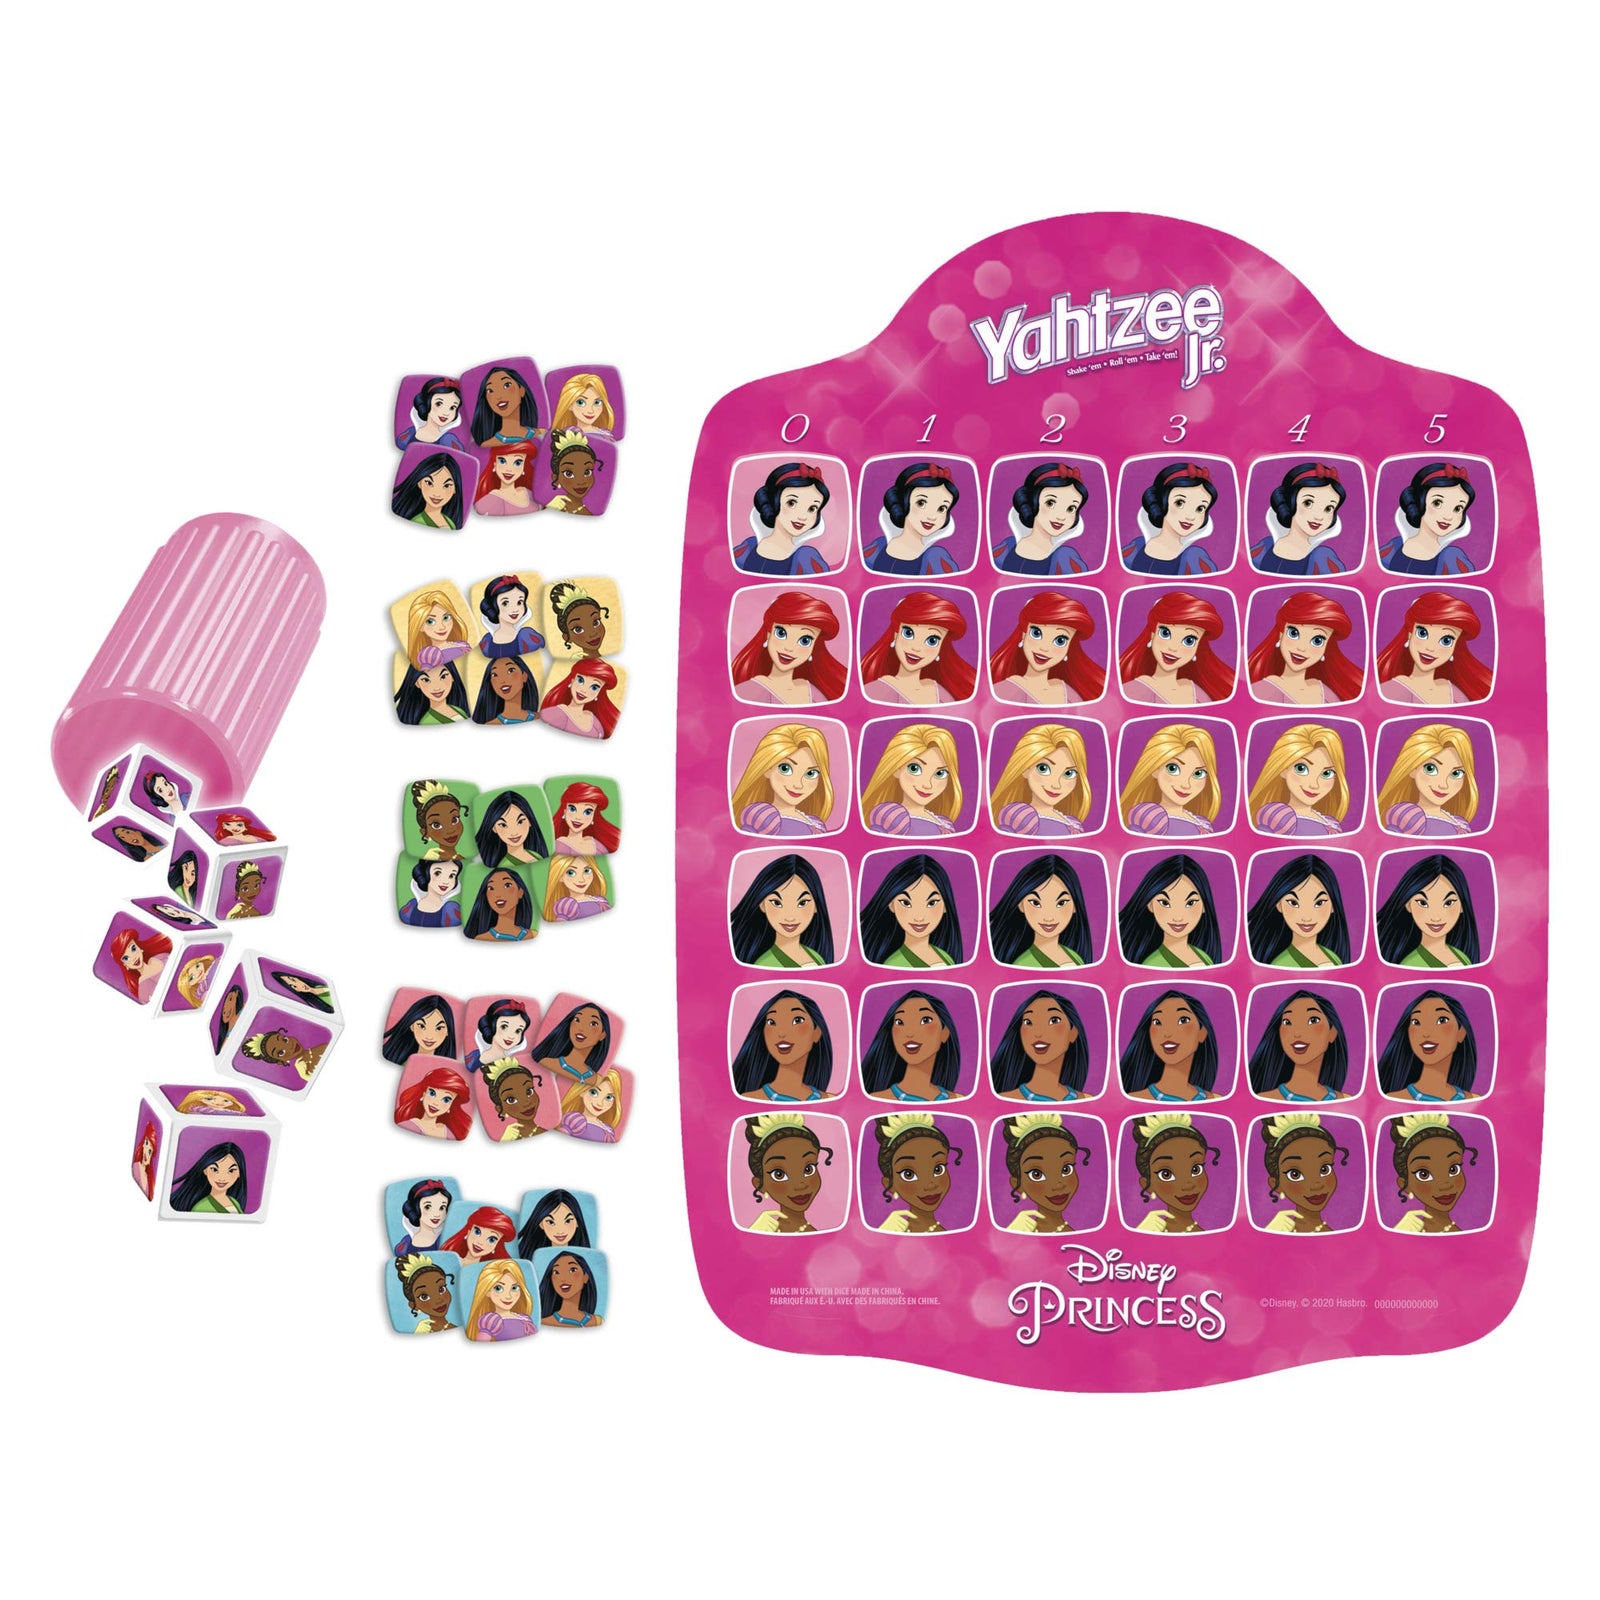 Hasbro Gaming Yahtzee Jr.: Disney Princess Edition Board Game for Kids Ages 4 and Up, for 2-4 Players, Counting and Matching Game for Preschoolers (Amazon Exclusive)